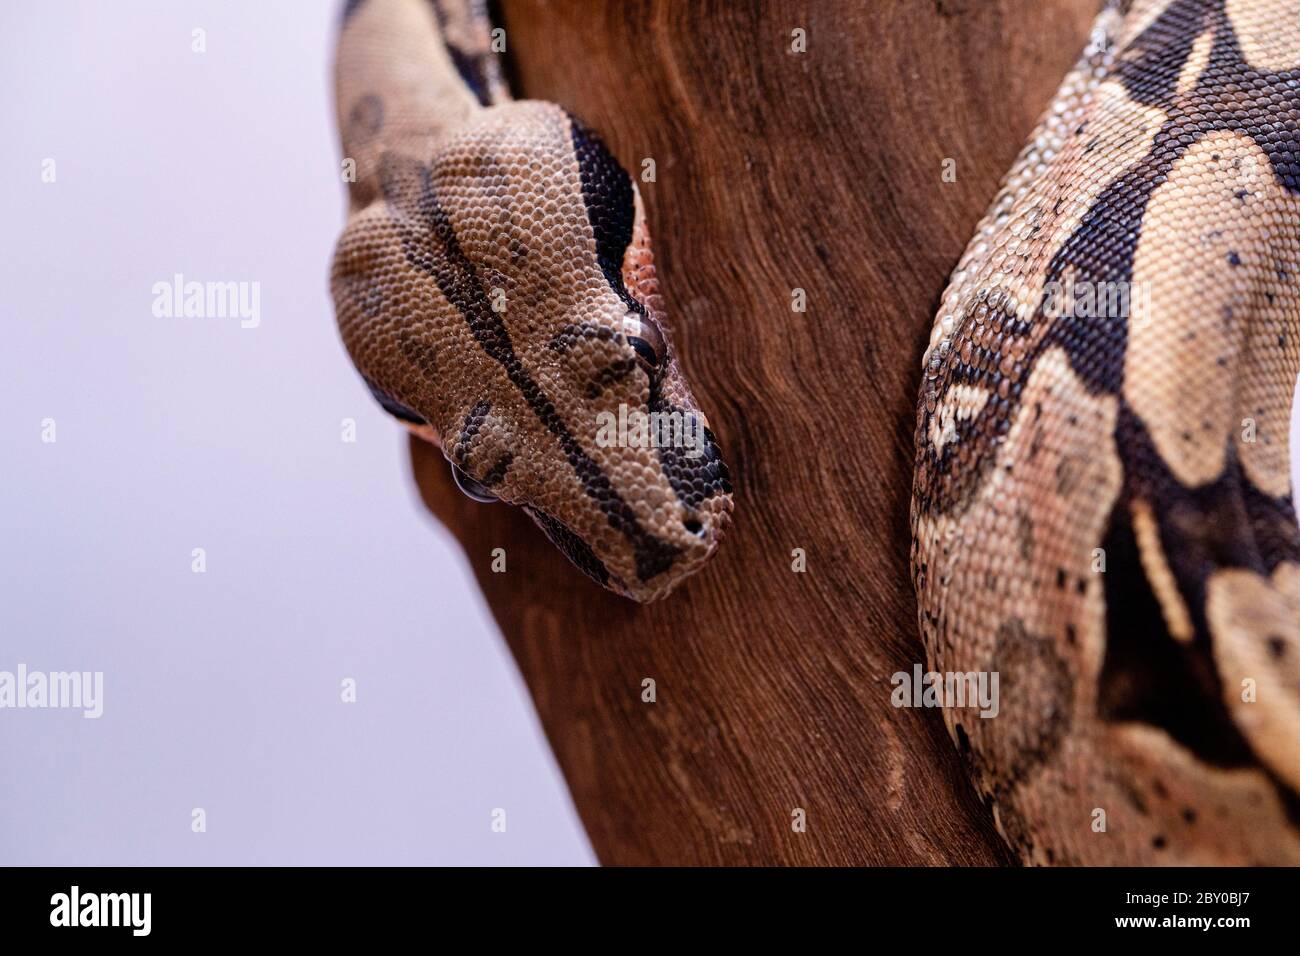 The boa constrictor (Boa constrictor), also called the red-tailed boa or the common boa, is a species of large, non-venomous, heavy-bodied snake that Stock Photo